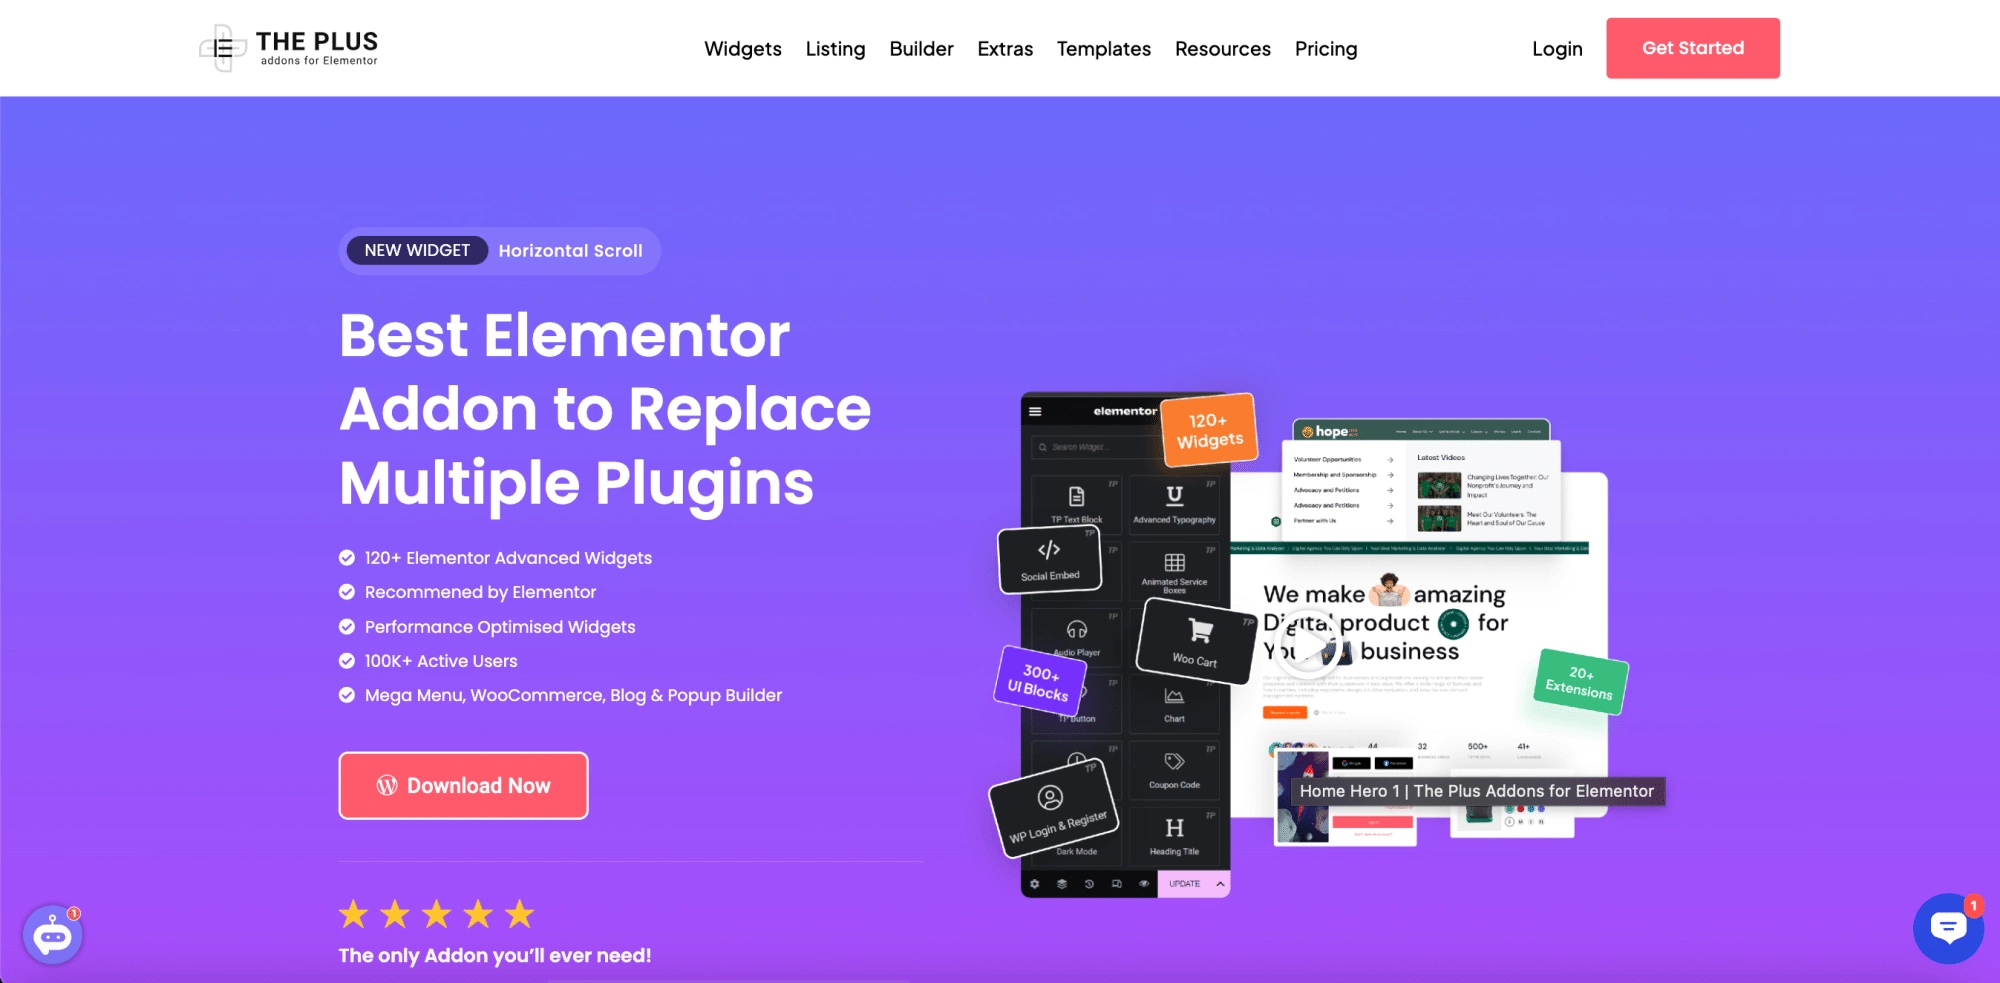 The plus addons for elementor 1 website vs blog [key differences, types, use cases] from the plus addons for elementor